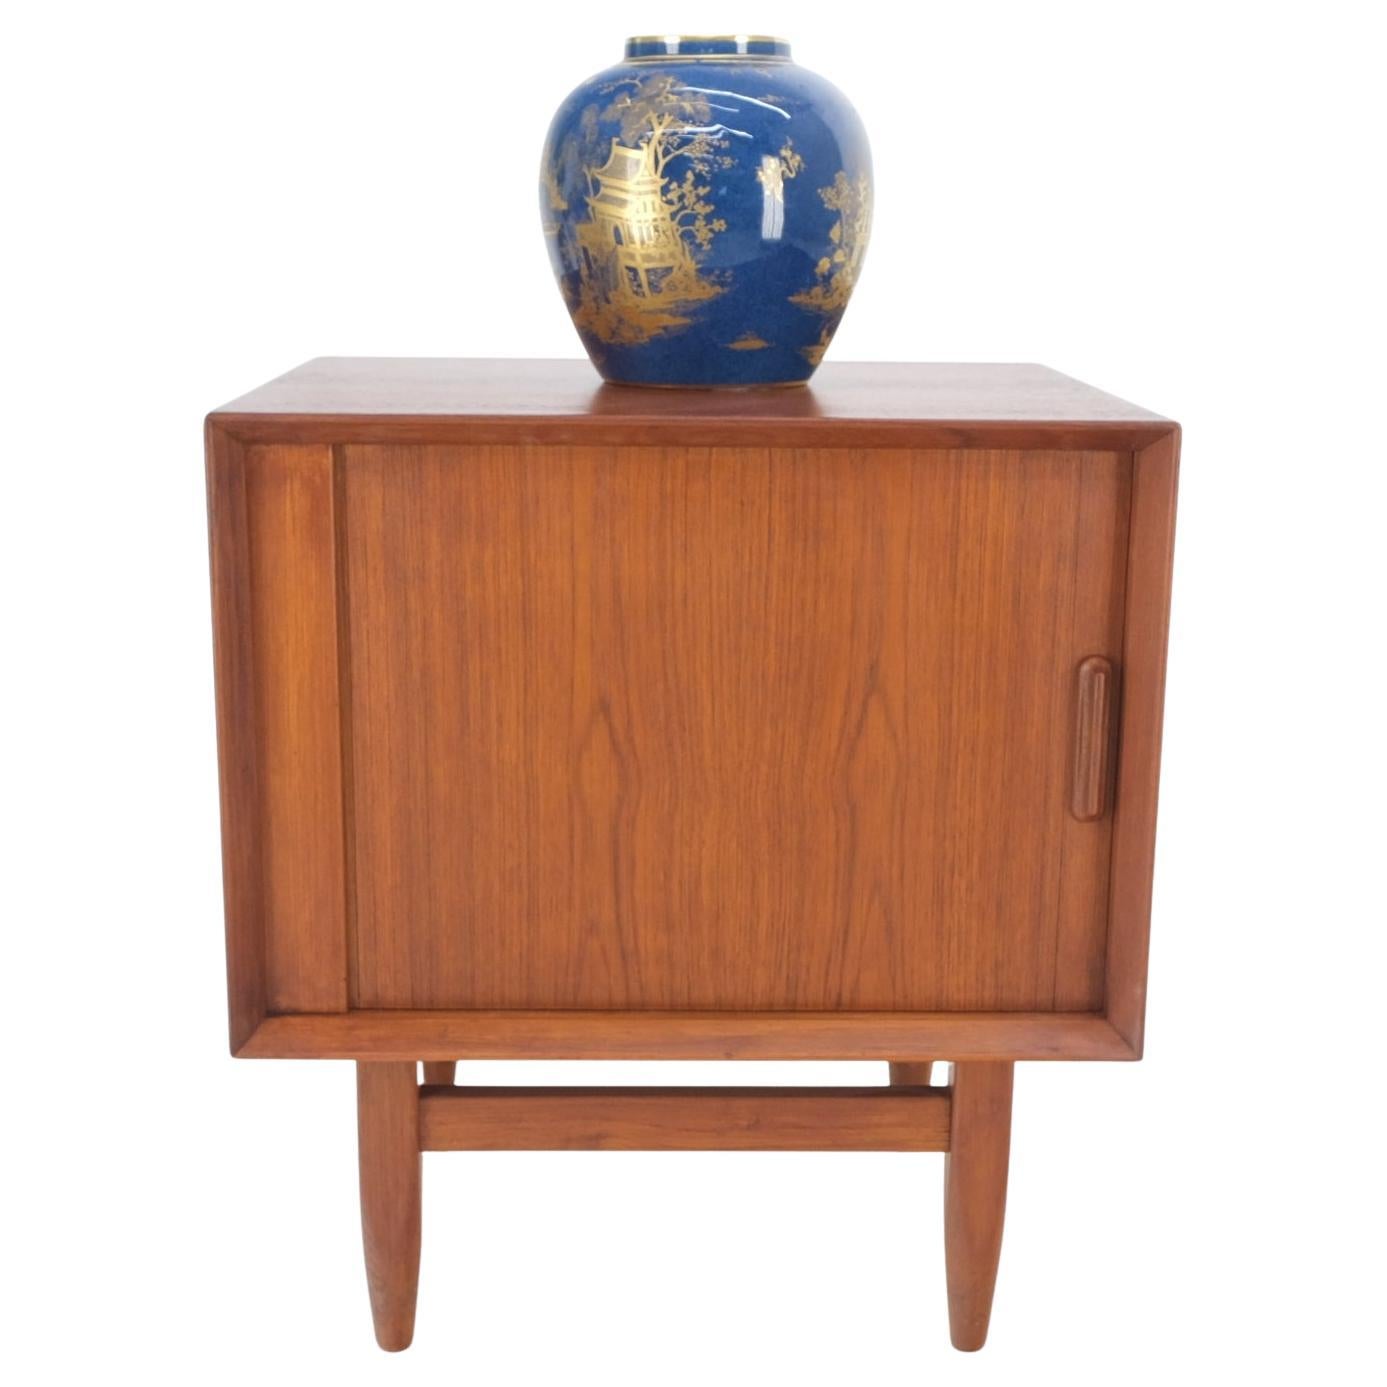 Danish Mid-Century Modern Teak Side End Table Night Stand Tambour Doors Falster For Sale 3